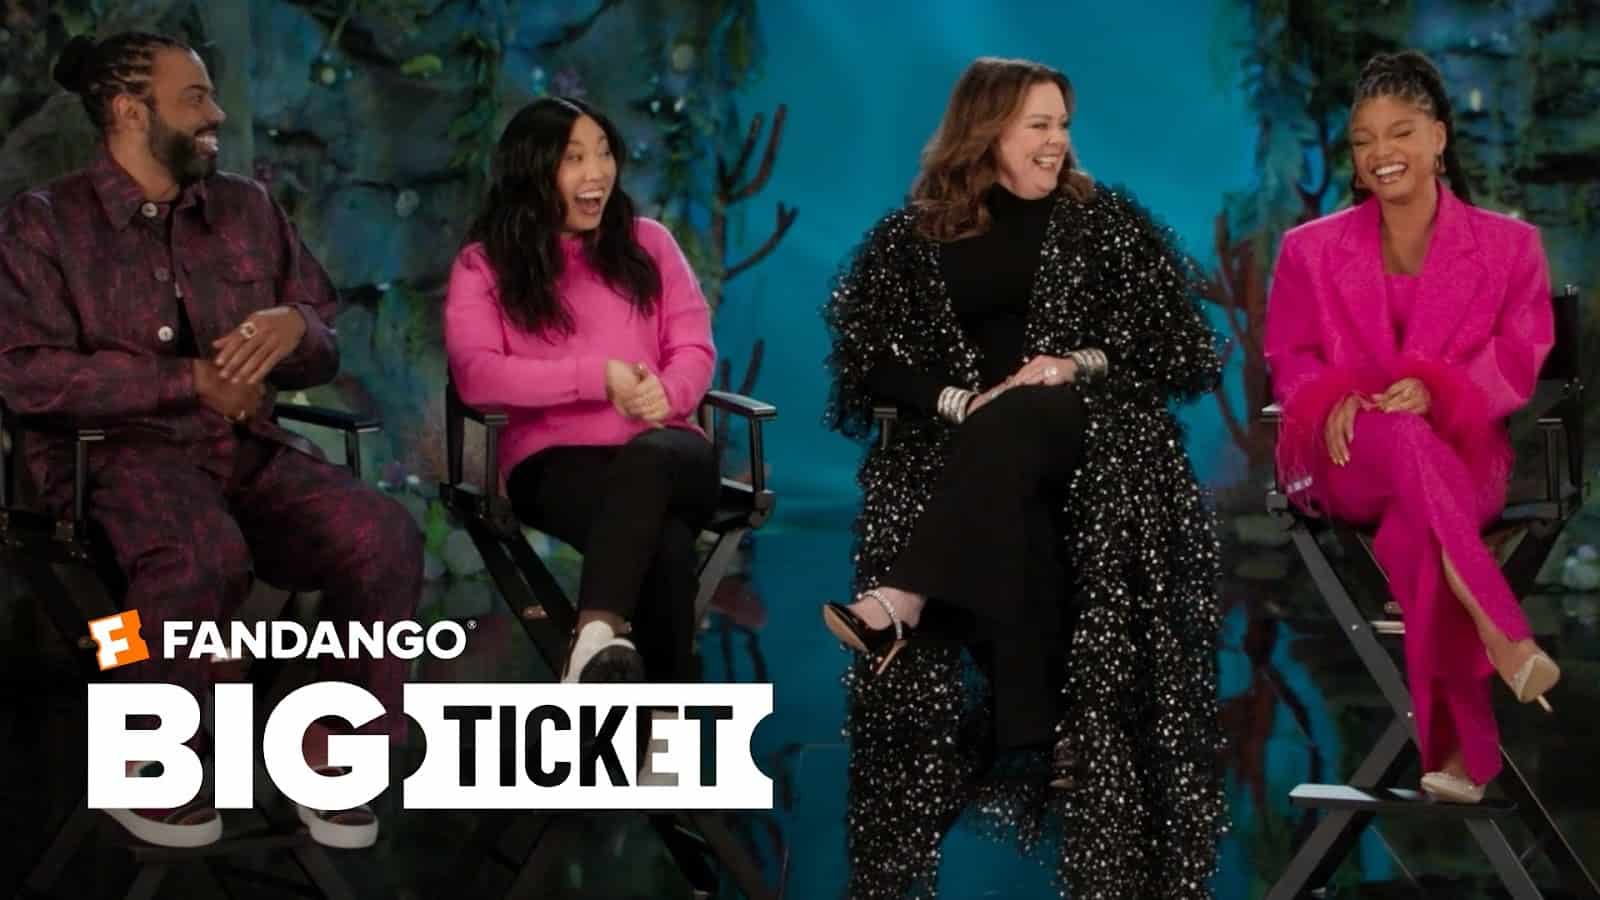 Fandango Launches “Big Ticket” Video Series Featuring Behind-the-Scenes Looks at the Year’s Biggest Films 1